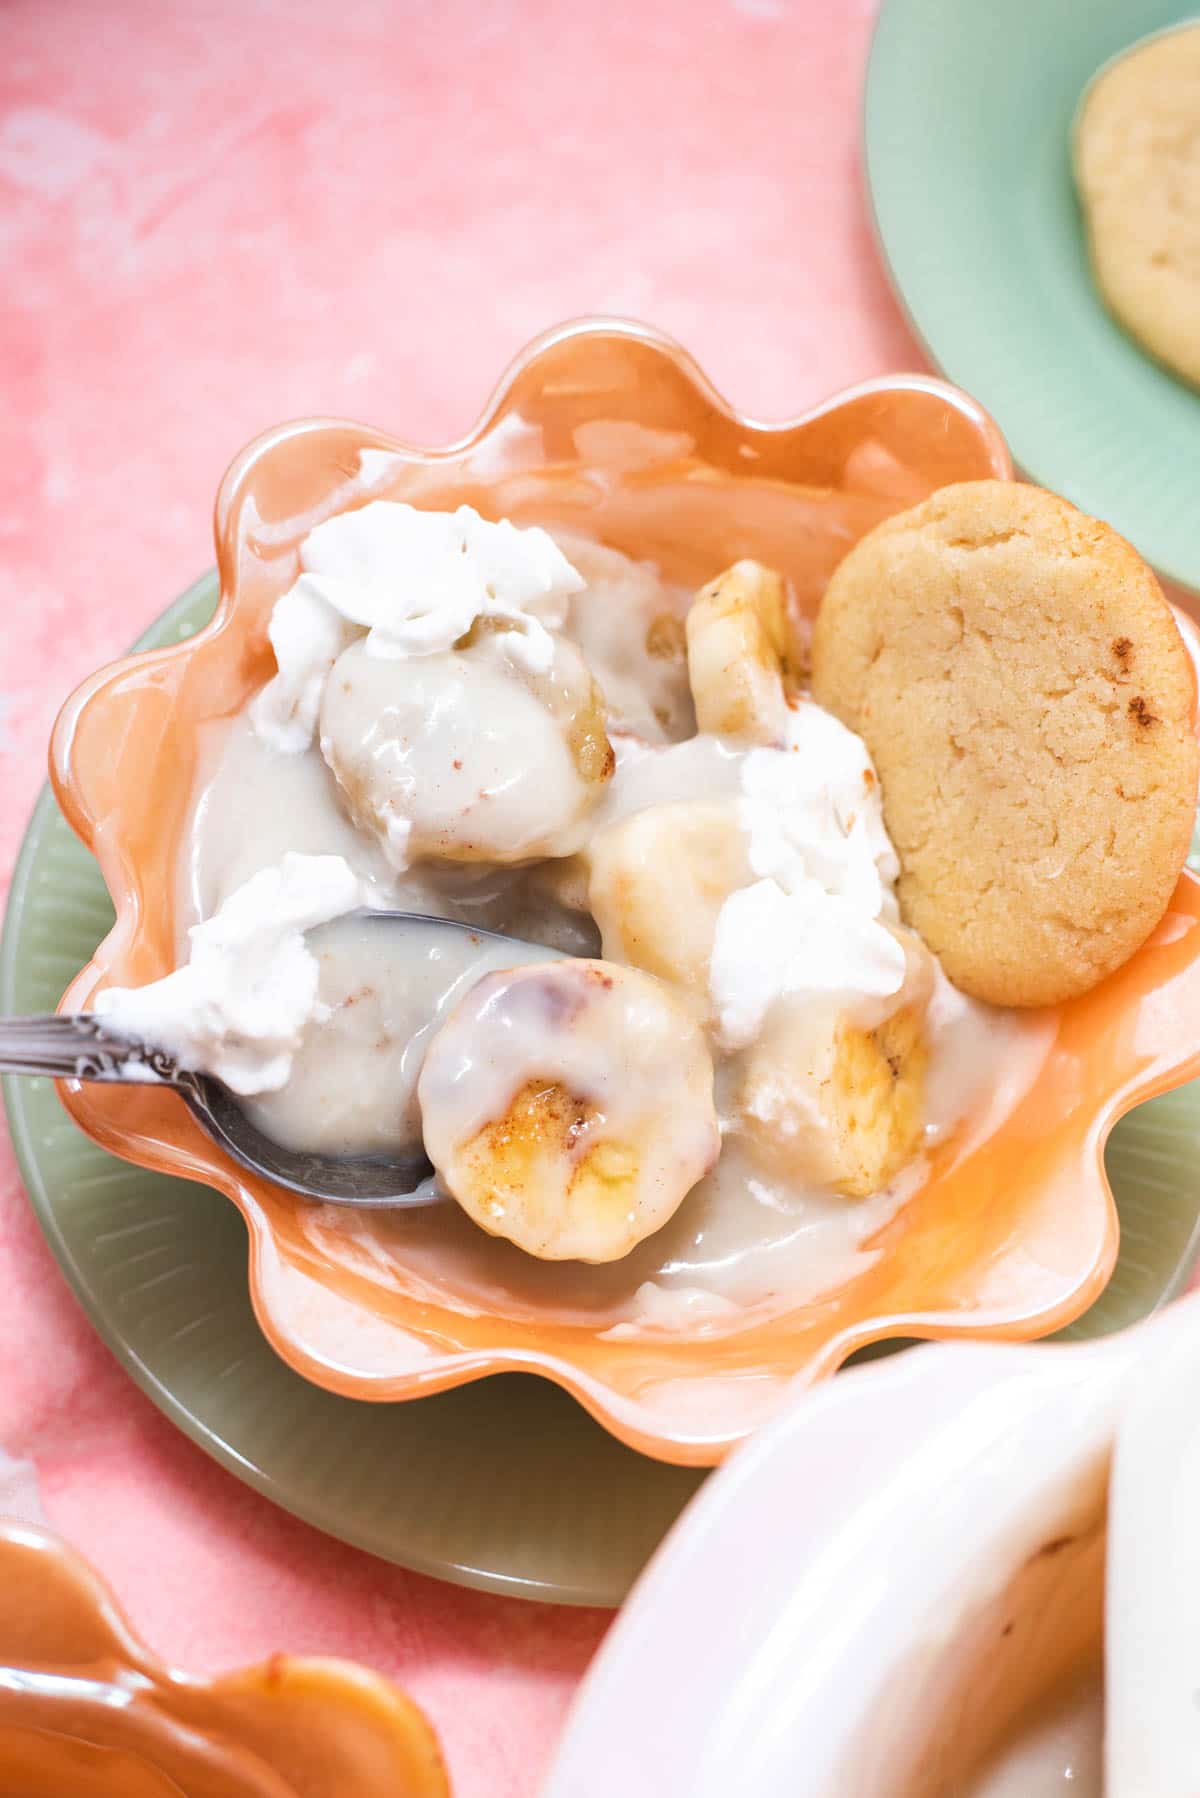 Cloes up of spoon in vanilla pudding with sliced bananas and a cookie